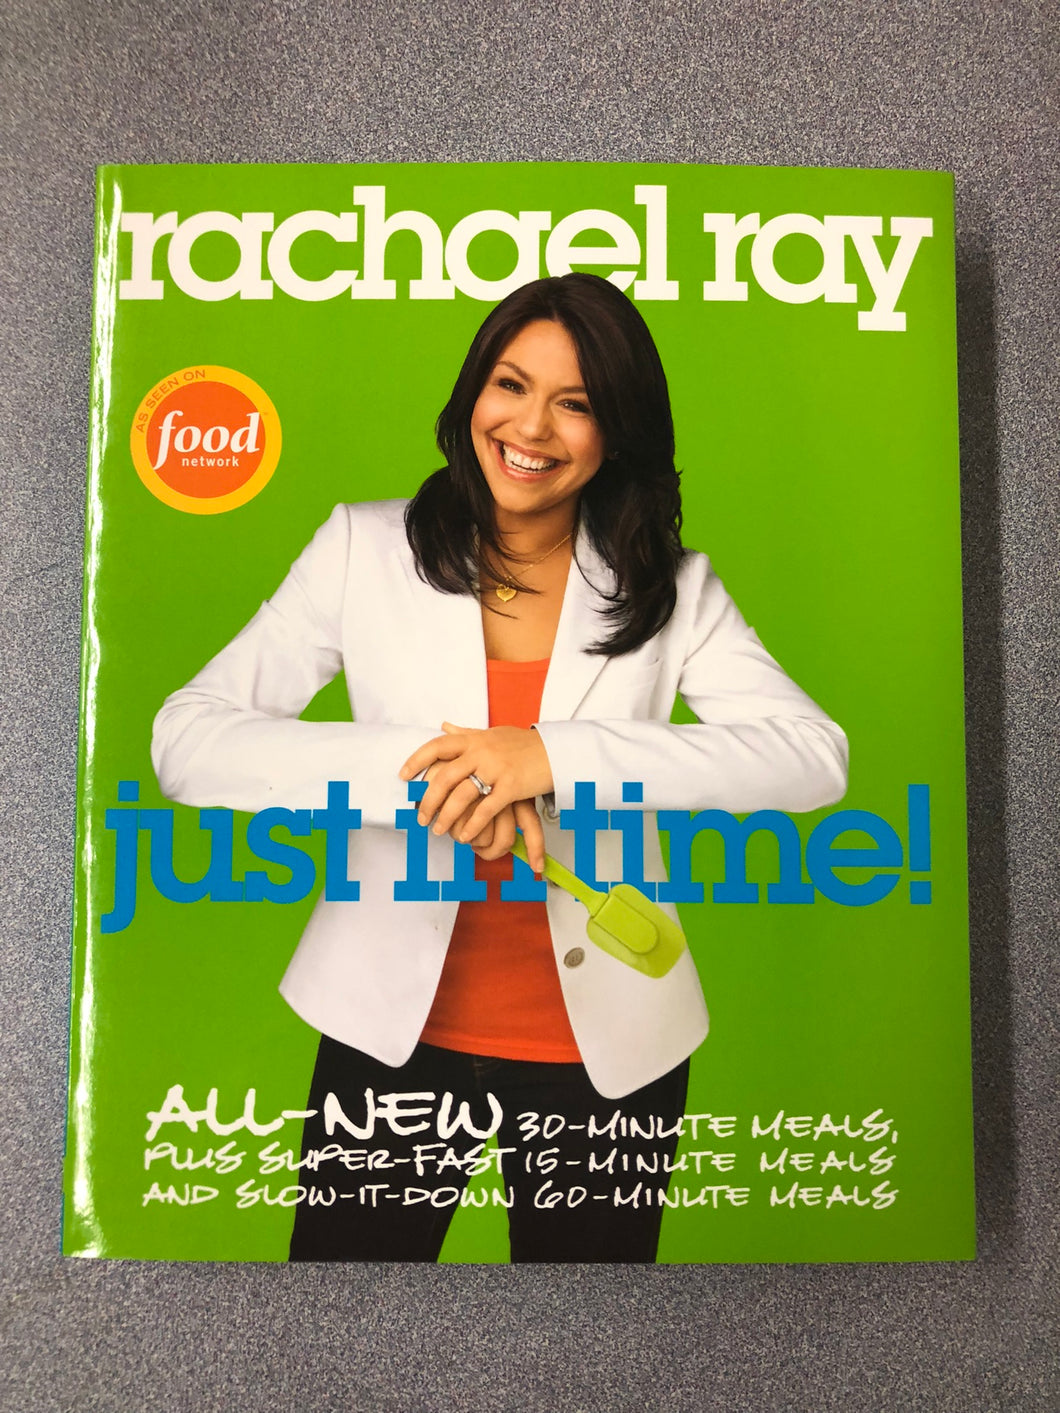 Rachael Ray Just In Time!: All-New 30-Minute Meals, Plus Super-Fast 15-Minute Meals and Slow-It-Down 60-Minute Meals, Ray, Rachel [2007] CO 7/22